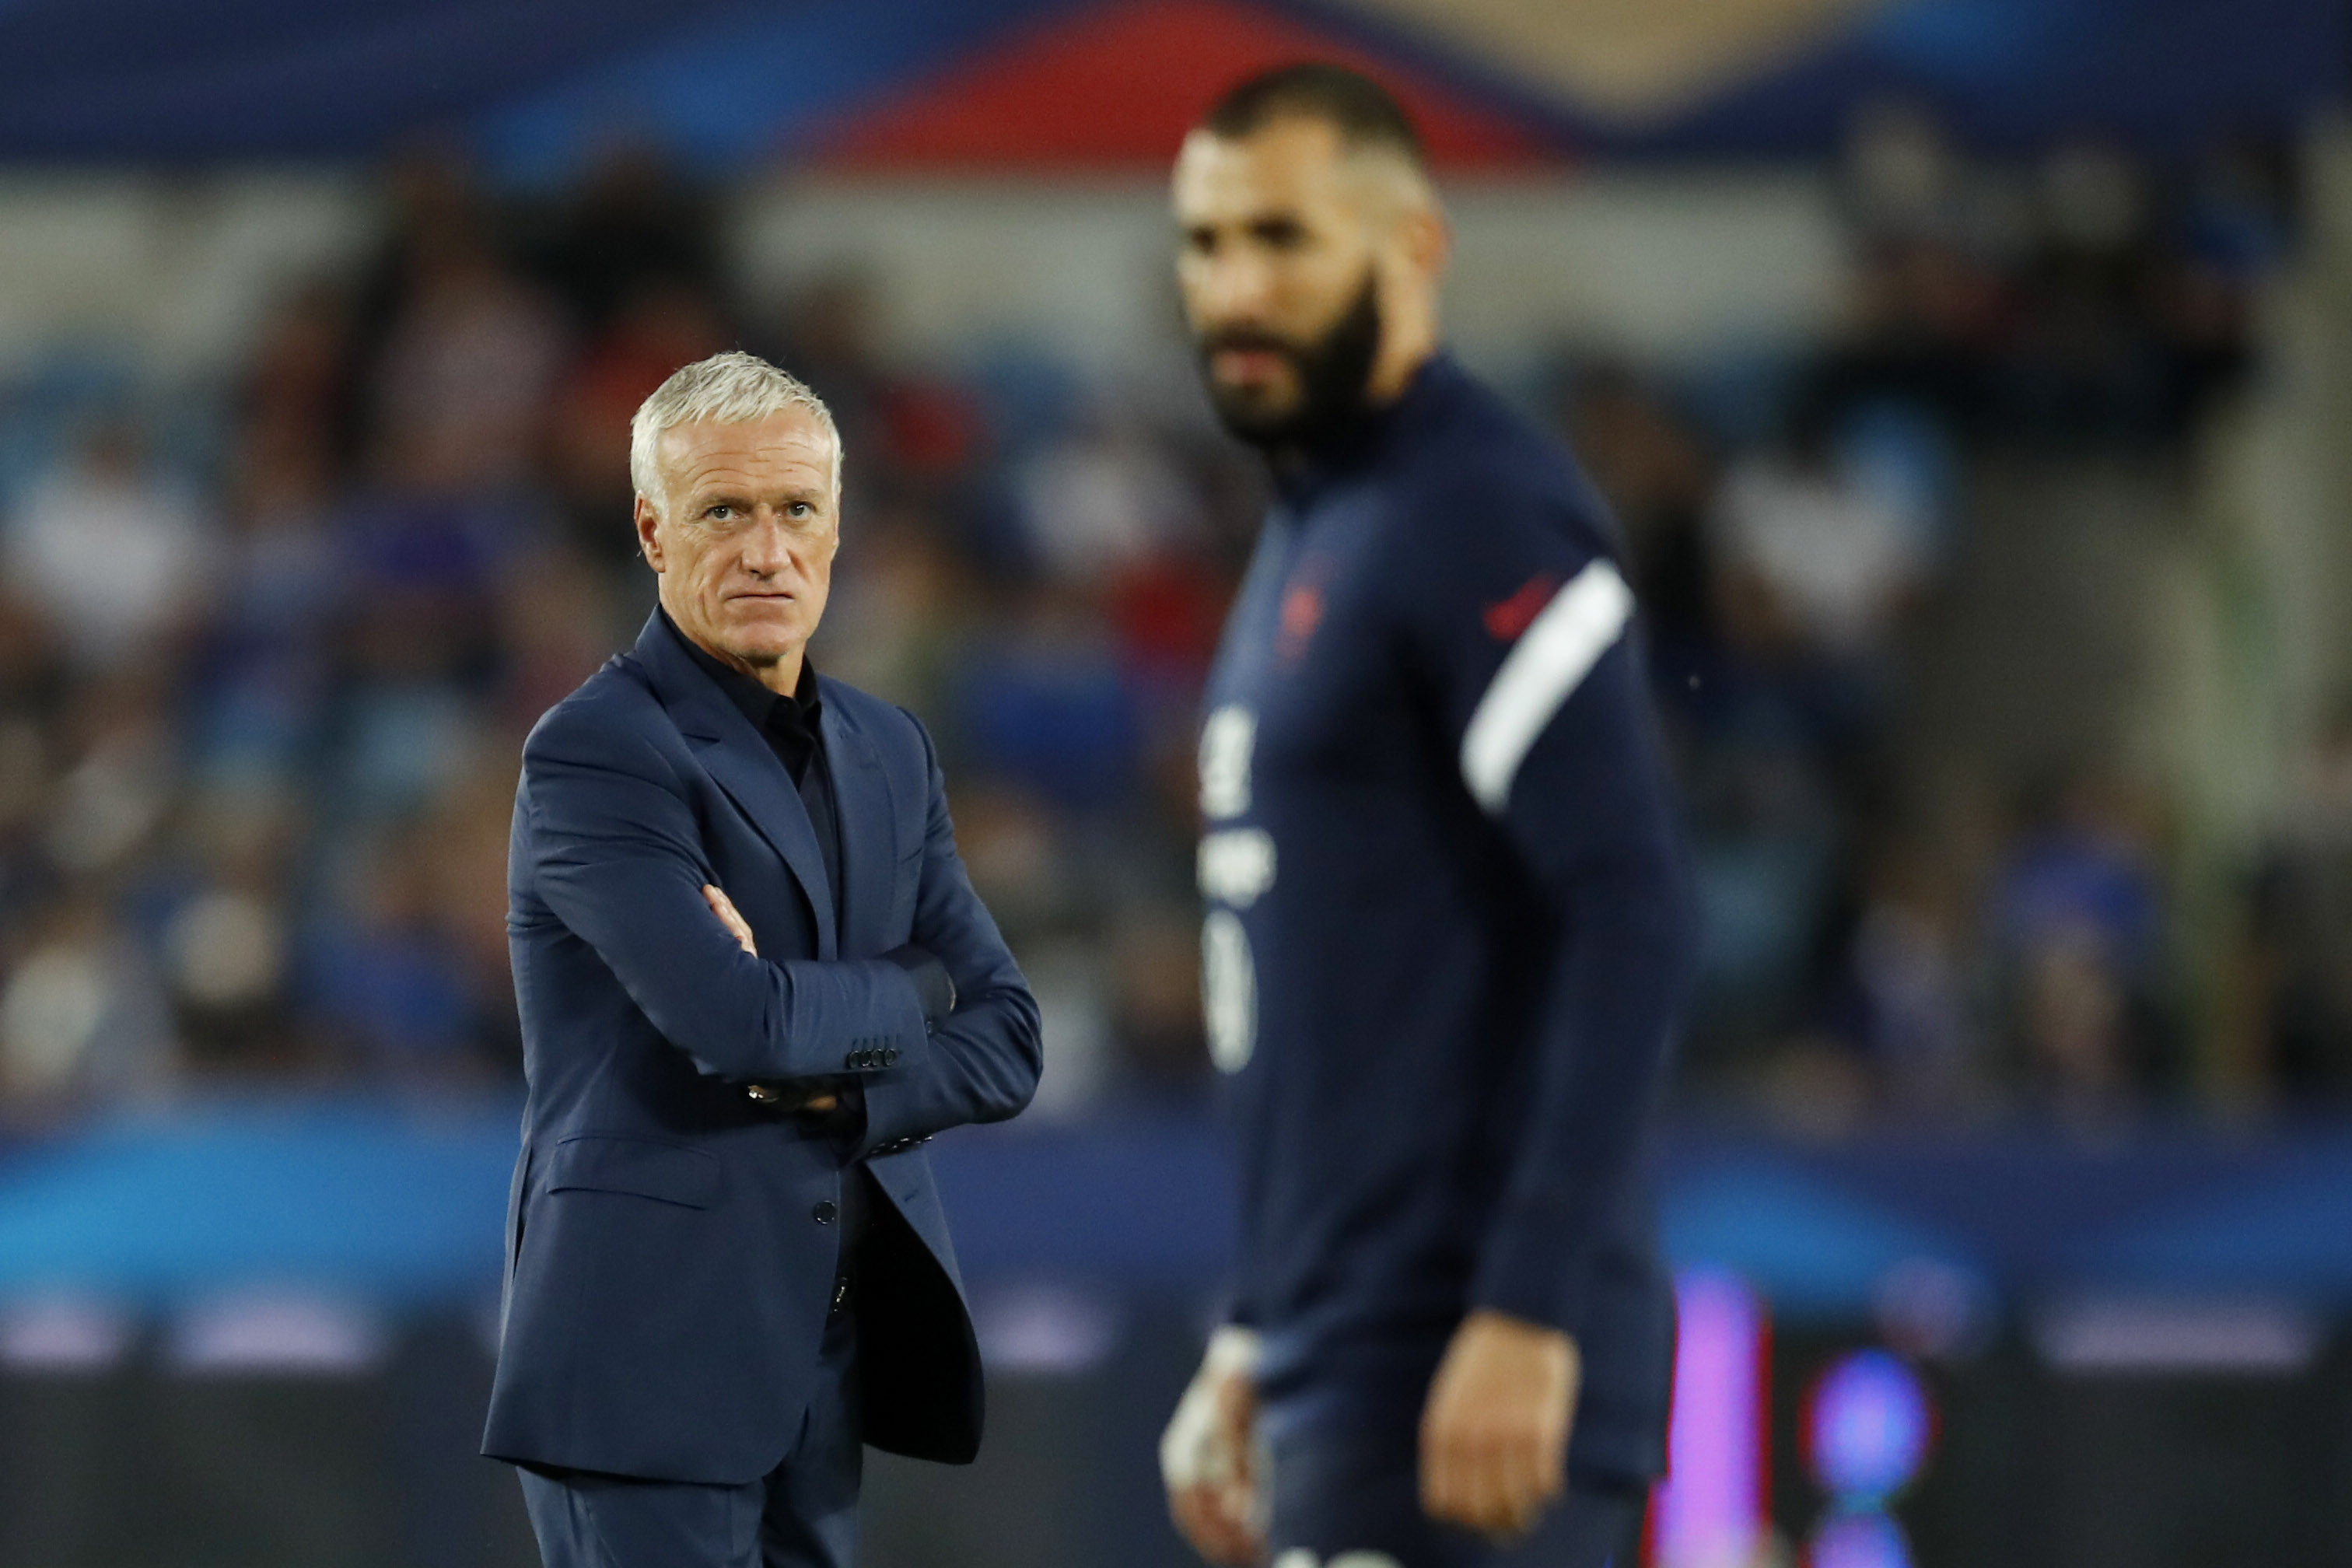 Soccer Football - World Cup - UEFA Qualifiers - Group D - France v Bosnia and Herzegovina - Stade de la Meinau, Strasbourg, France - September 1, 2021 France coach Didier Deschamps looks on before the match with France's Karim Benzema seen in the foreground REUTERS/Gonzalo Fuentes